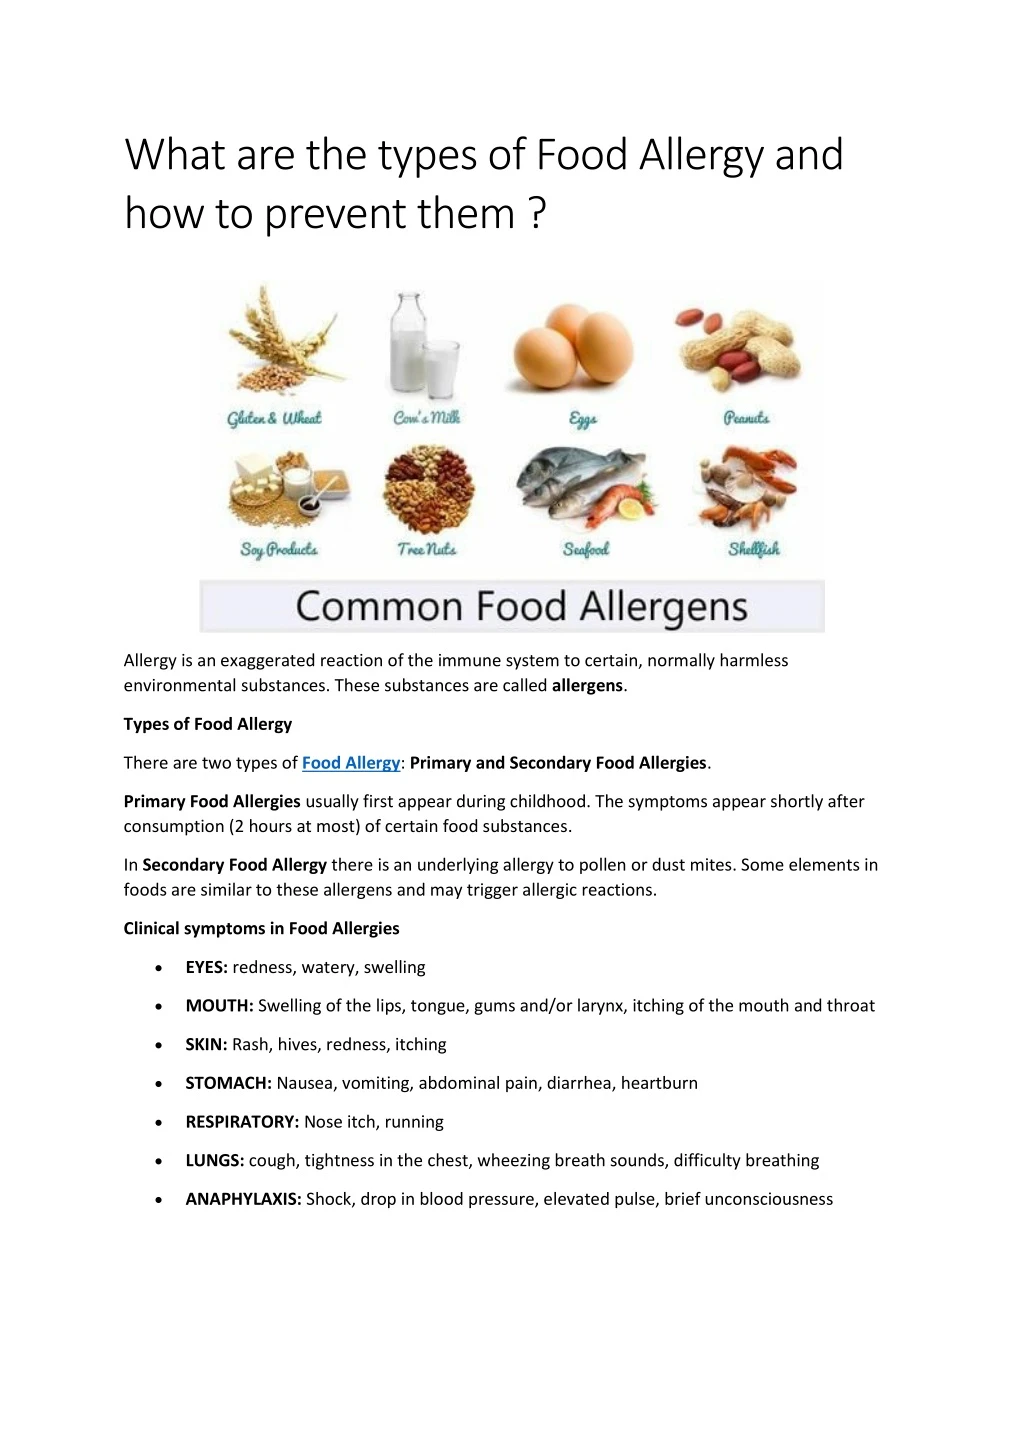 what are the types of food allergy